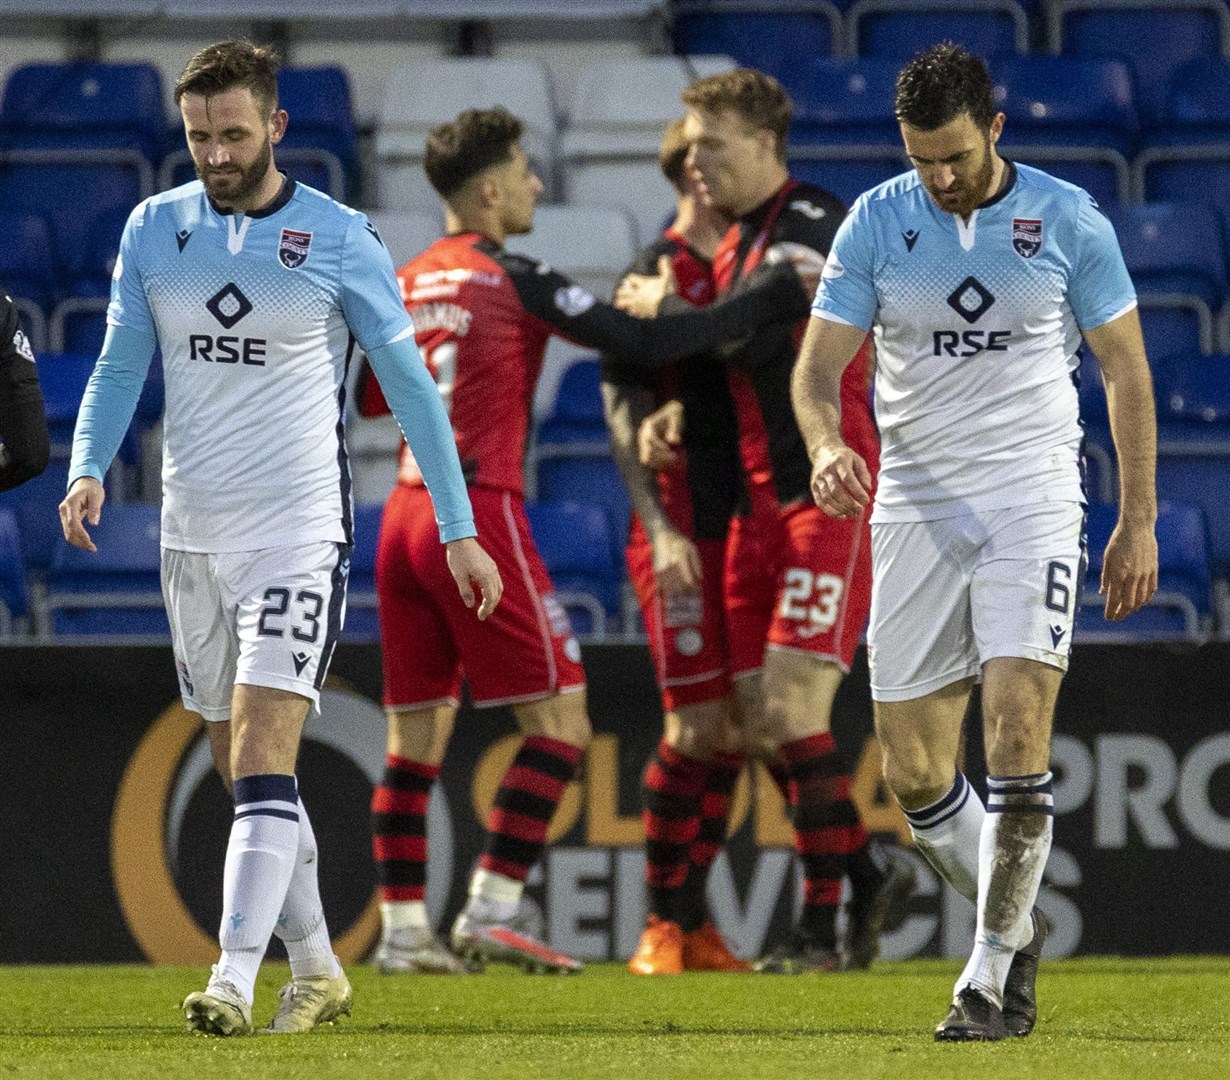 Picture - Ken Macpherson, Inverness. Ross County(1) v St.Mirren(3). 21.04.21. Dejection from Ross County's Alex Iacovitti and Ross Draper after St.Mirren's Lee Erwin had scored the equaliser.